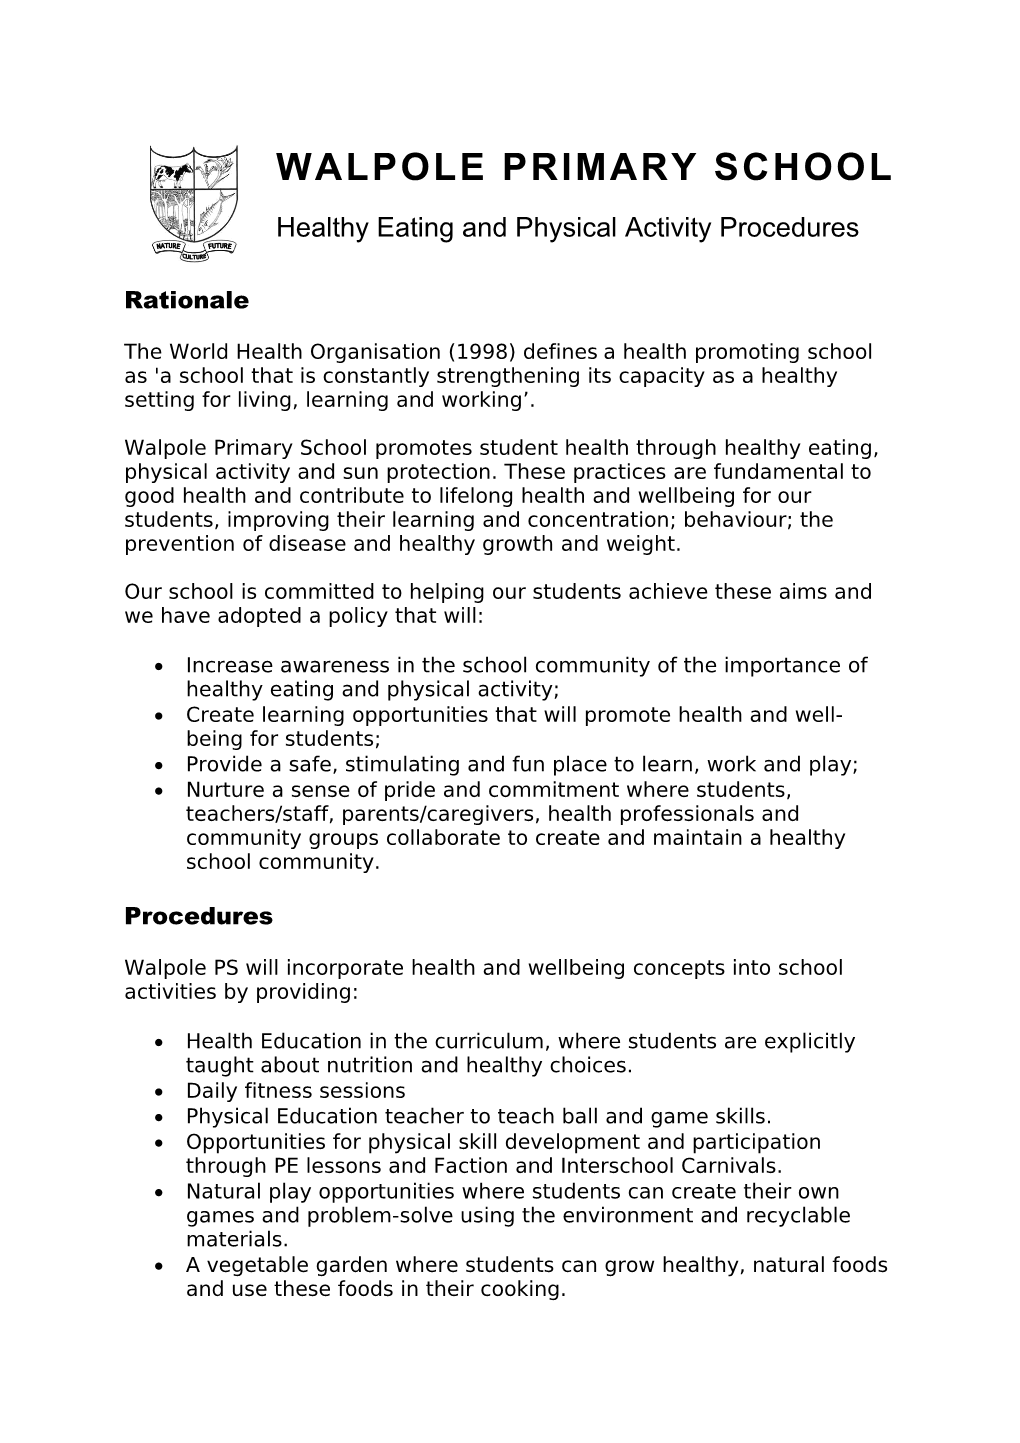 WALPOLE PRIMARY SCHOOL Healthy Eating and Physical Activity Procedures